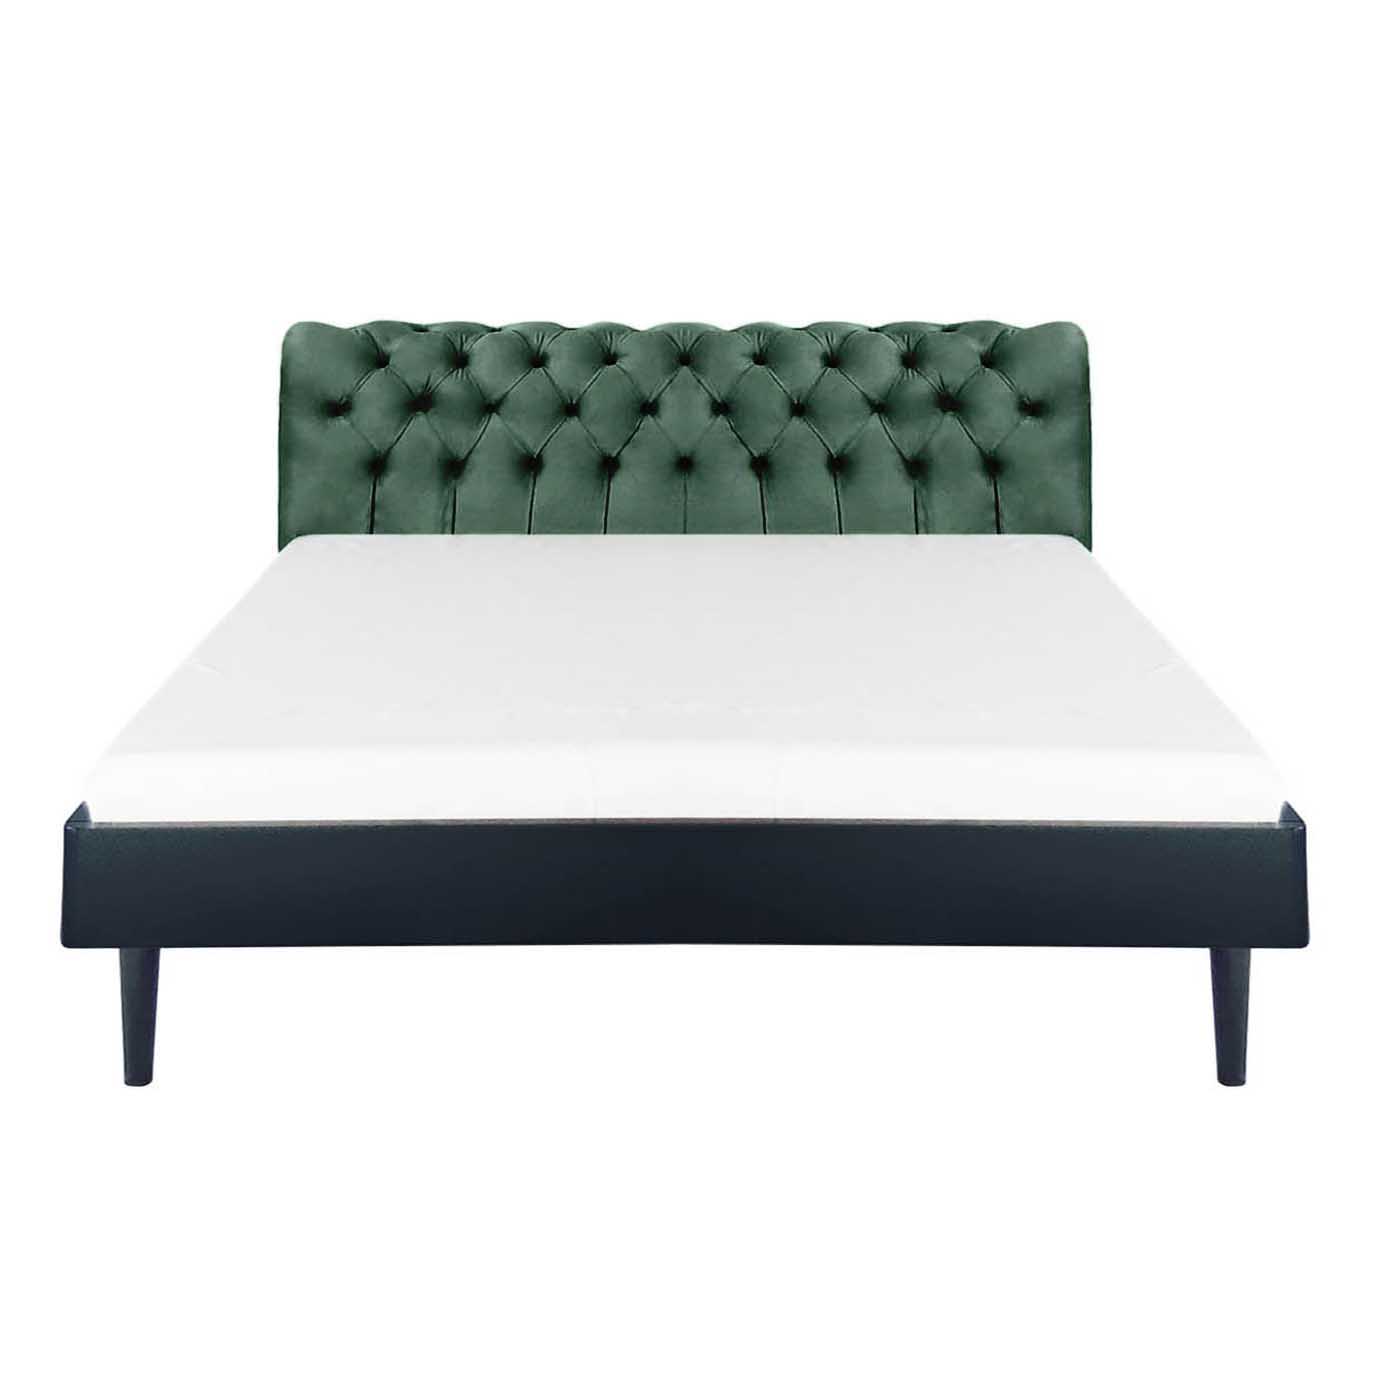 Chesterfield Green Stitch Black King Bed